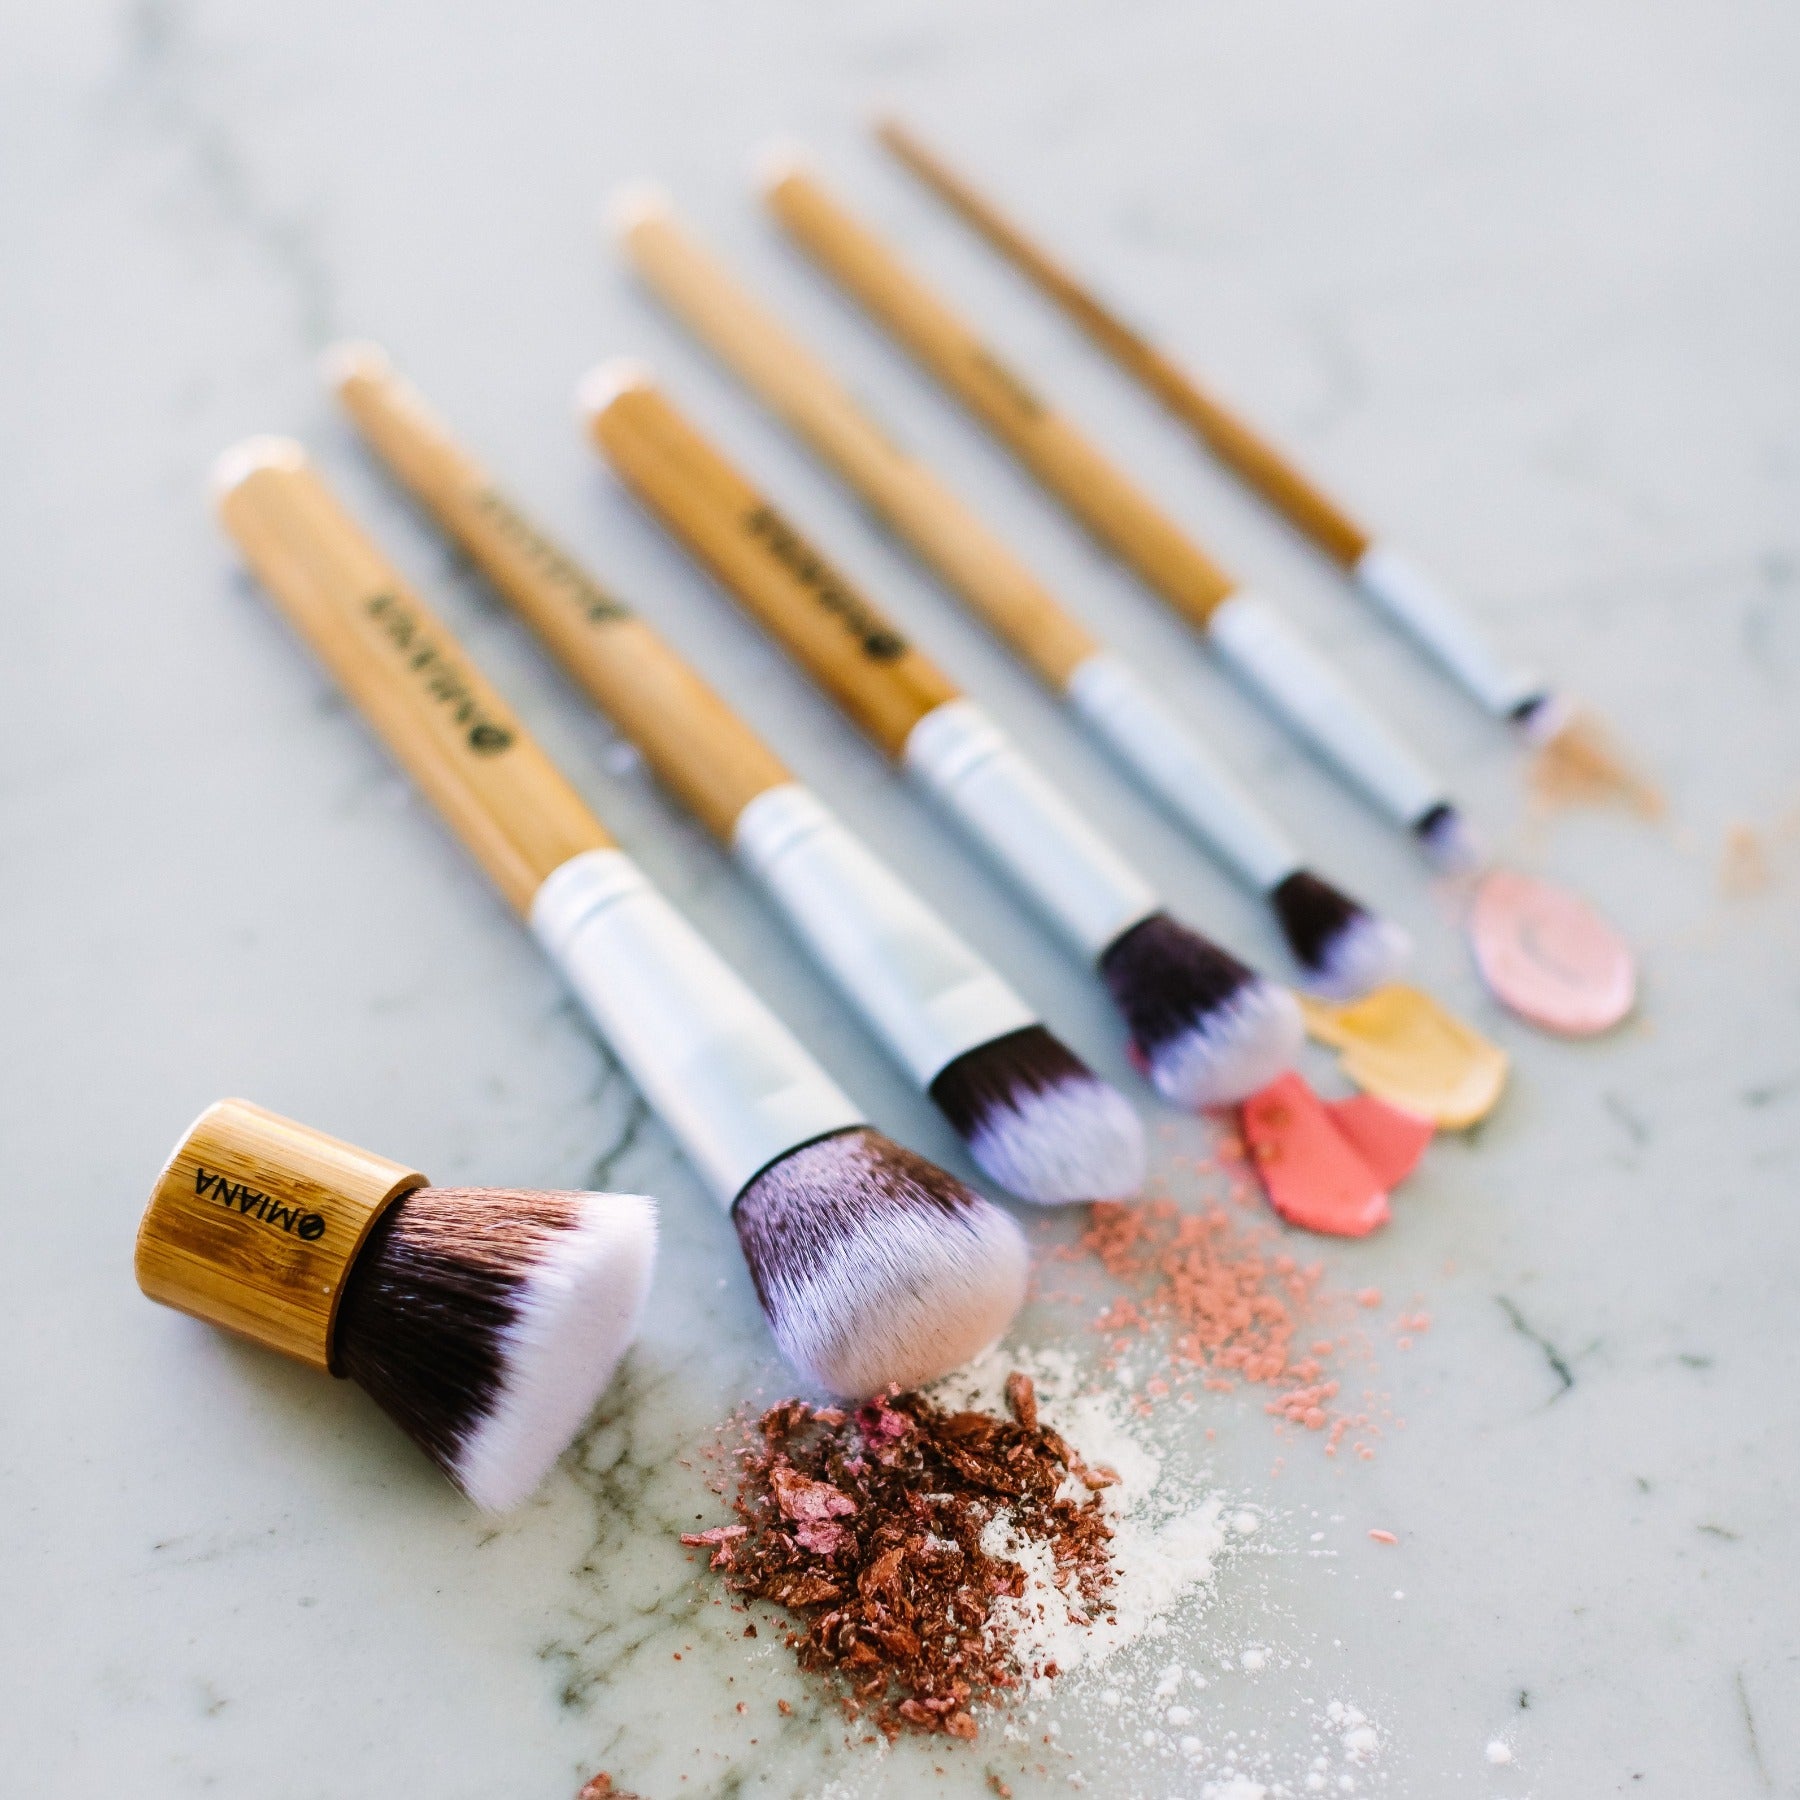 Synthetic Makeup Brushes for Clean Natural Makeup